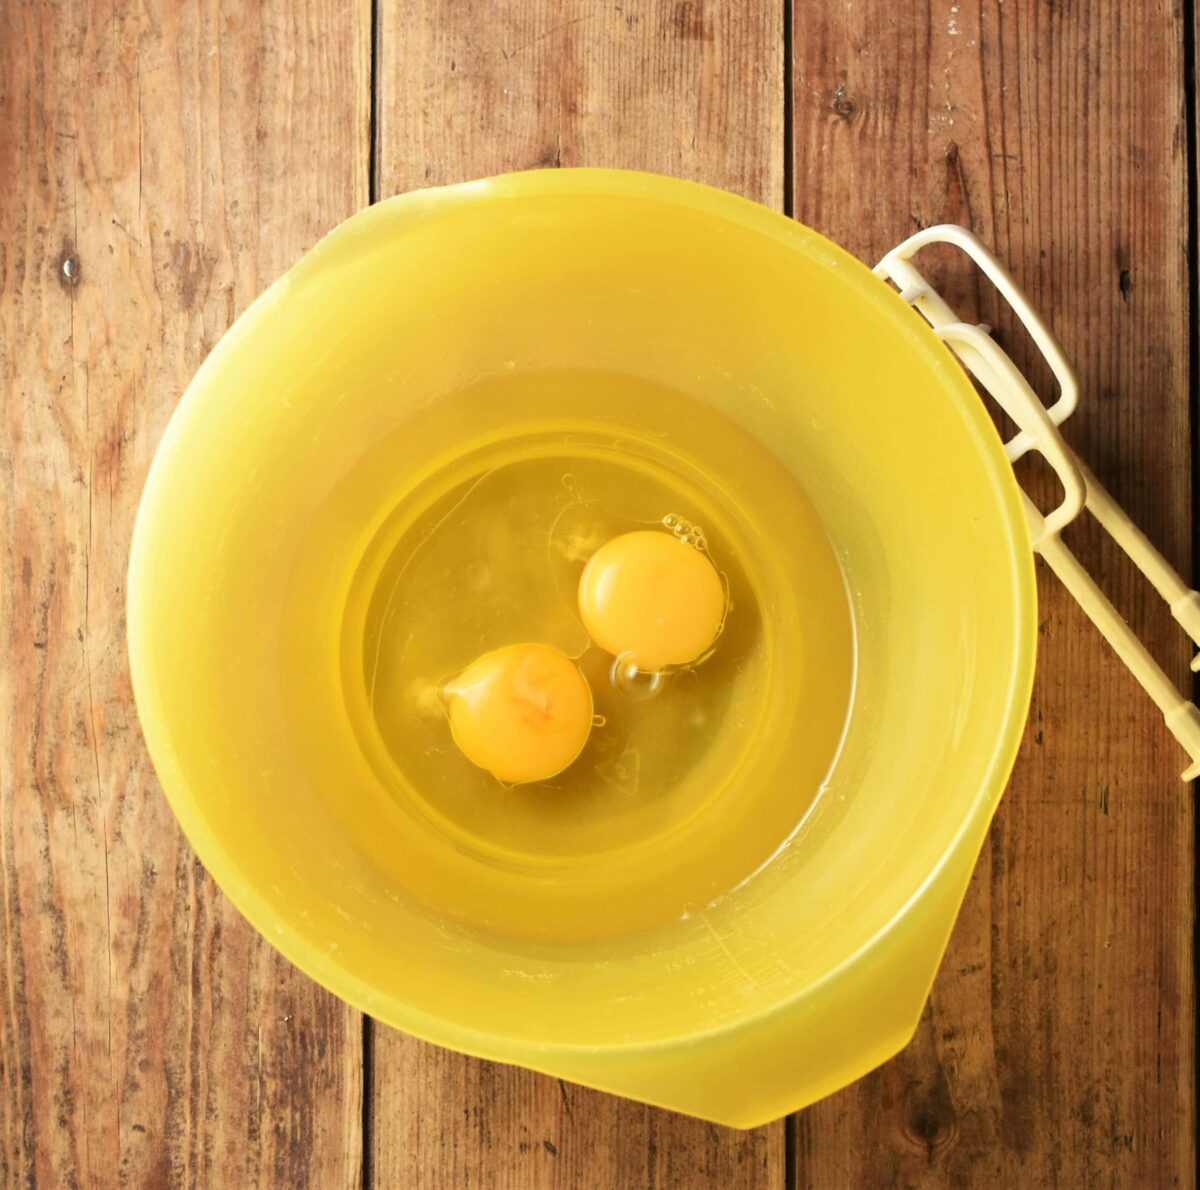 2 eggs and oil in large yellow bowl with electric mixer end pieces.